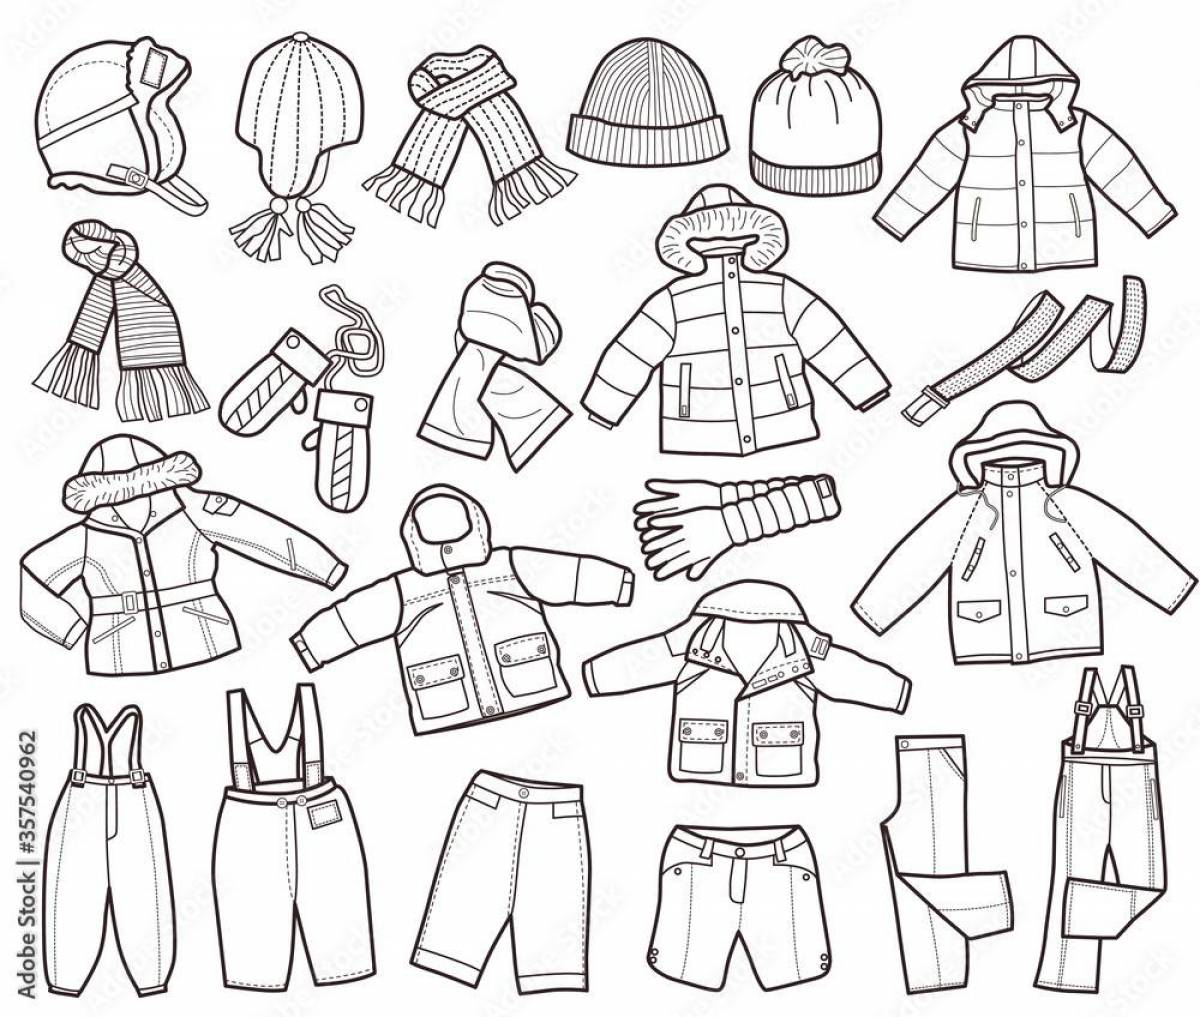 Cute clothes coloring page for 5-6 year olds